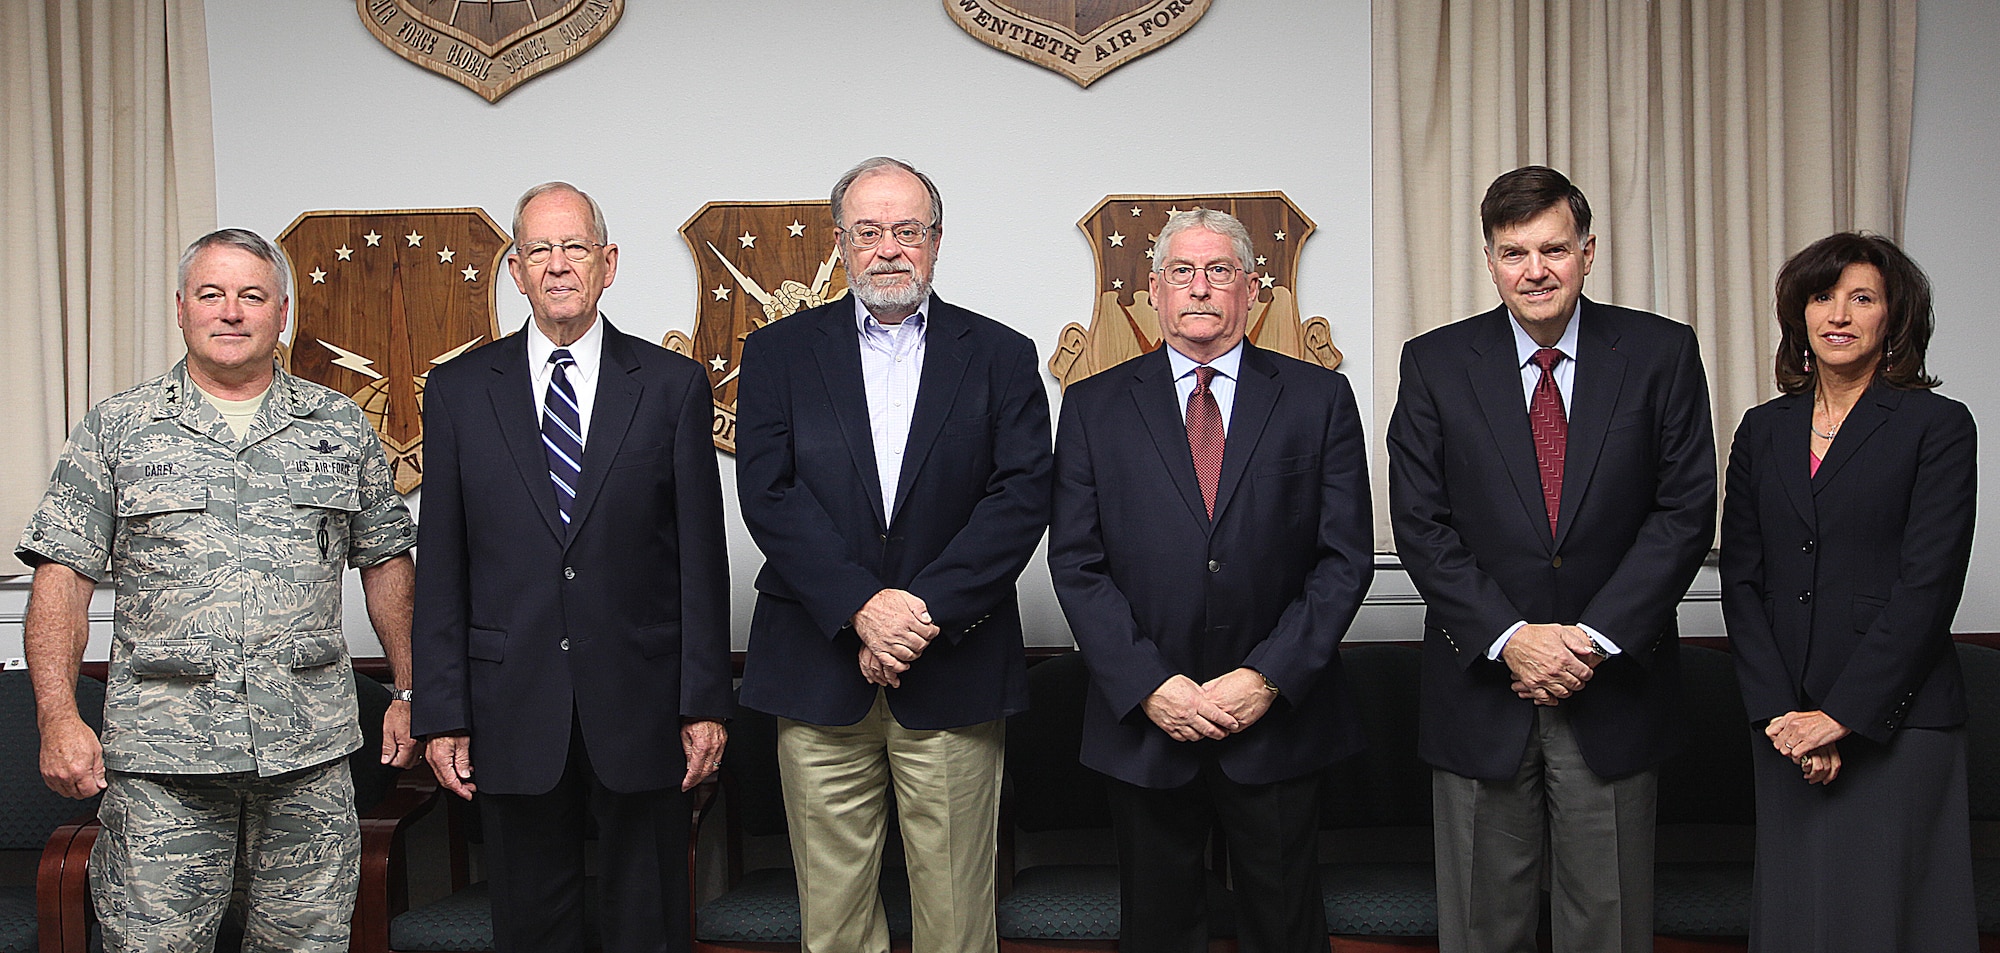 Maj. Gen. Michael J. Carey, 20th Air Force commander, poses for a photograph with retired Gen. Larry Welch, former Air Force Chief of Staff; Dr. Peter Nanos, Johns Hopkins University Applied Physics Laboratory; Dr. Robert Selden, Special Government Employee; Jim Gosler, CIA Clandestine Services; David McDarby, Defense Threat Reduction Agency Nuclear Surety Branch chief; and  Brenda Poole, Senior National Security Specialist, Science Applications Internal Corporation, prior to a Defense Science Board meeting at 20th AF headquarters Sept. 21. (U.S. Air Force photo by Matt Bilden)